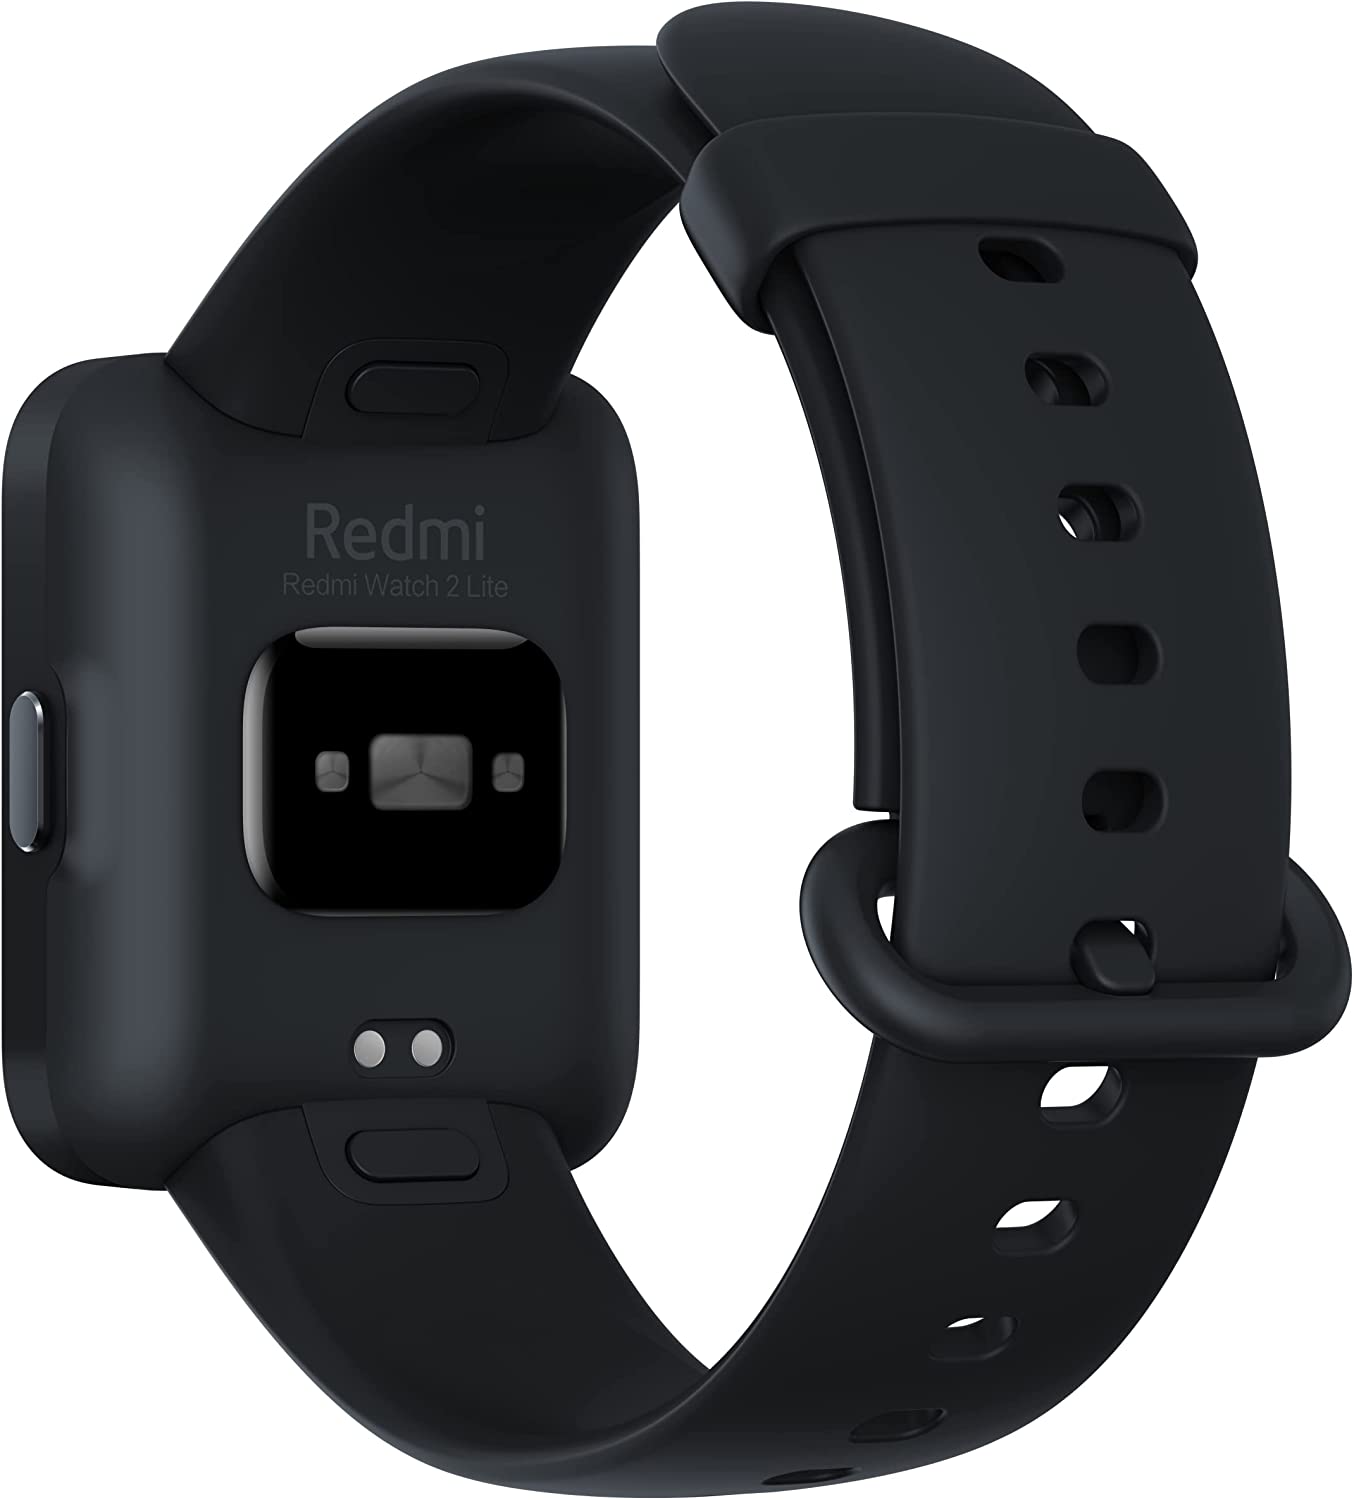 Redmi Smart Watch 2 Lite Black by Xiaomi - 1.55’’ Touch Screen, 5ATM Water Resistant, 10 Days Battery, GPS, 100+ Sports Mode, Steps, Sleep, Heart Rate Monitor, Fitness Activity Tracker